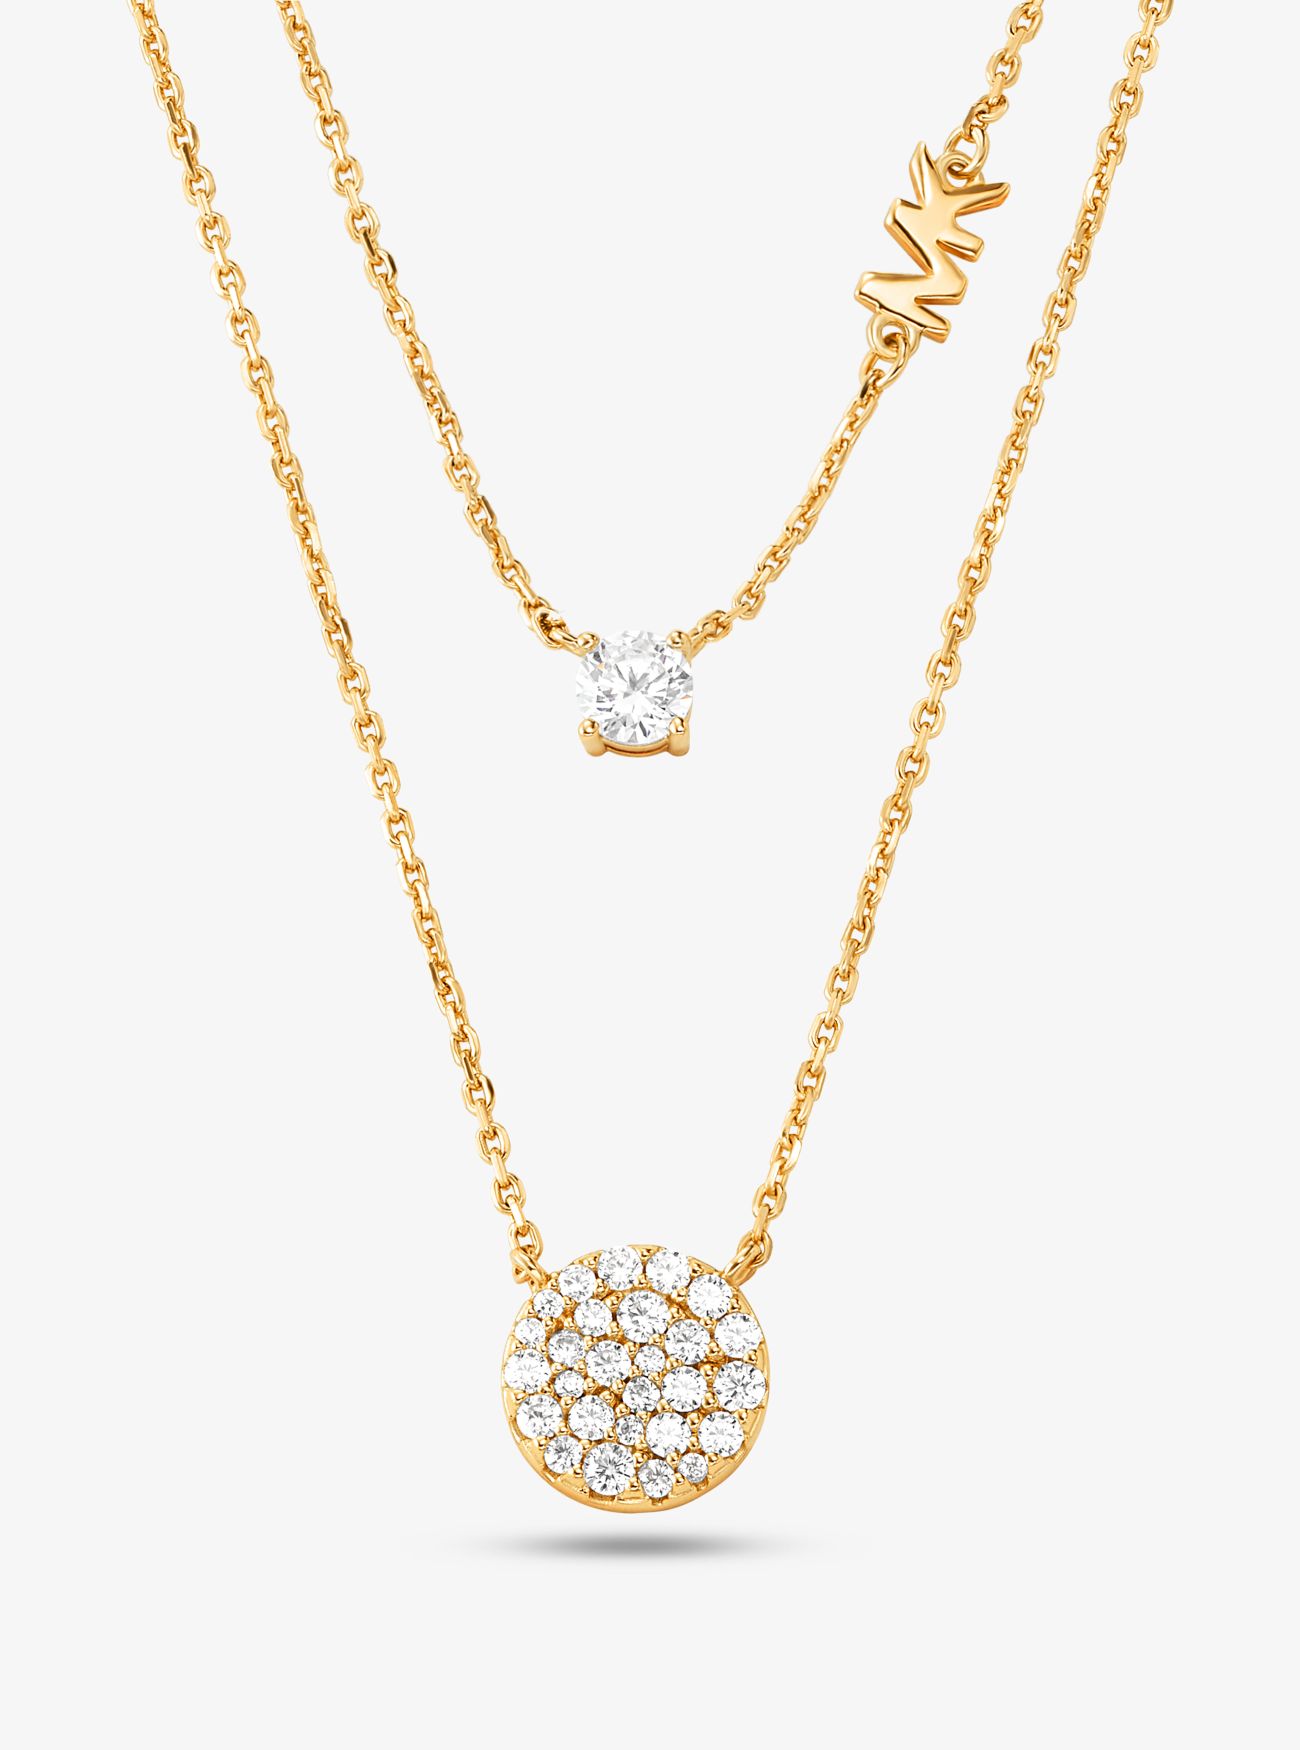 MK Precious Metal-Plated Sterling Silver Pavé Disc Layering Necklace - Gold - Michael Kors